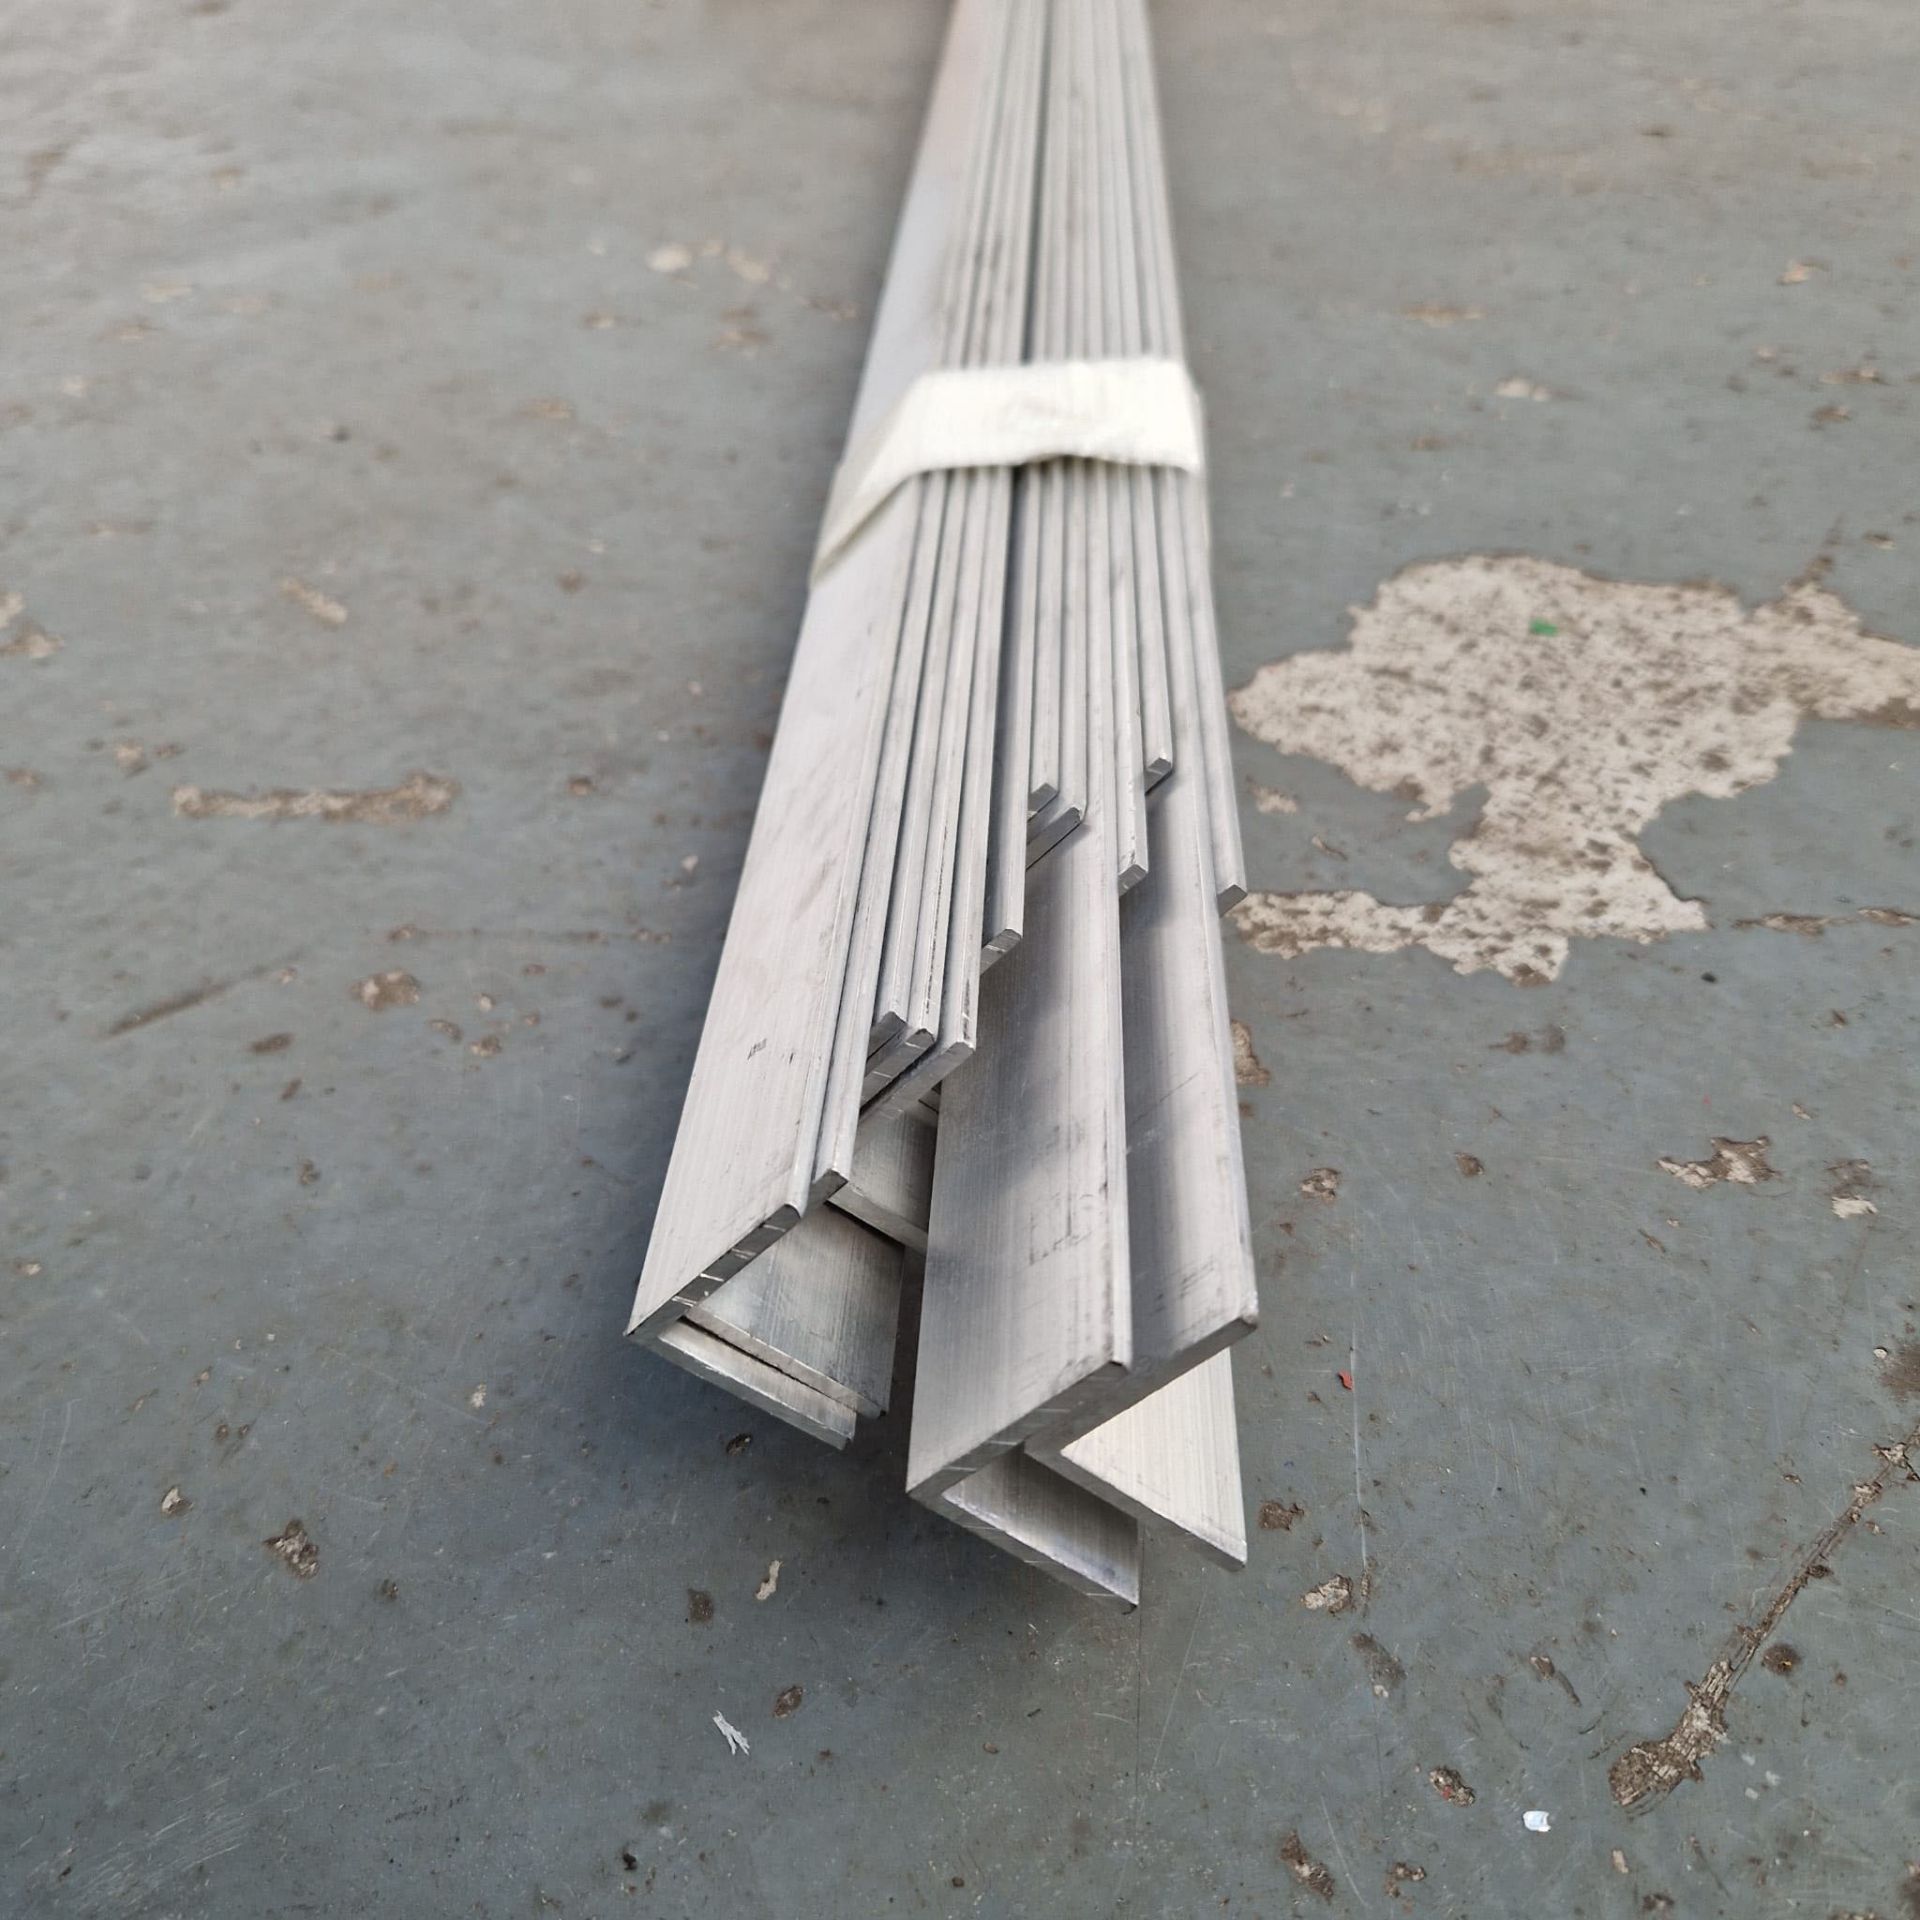 13 x Lengths of Aluminium 'L' Shape Angle Plate. Dimensions 1 1/2" x 1 1/2" x 1/8". Length 5000mm. - Image 3 of 3